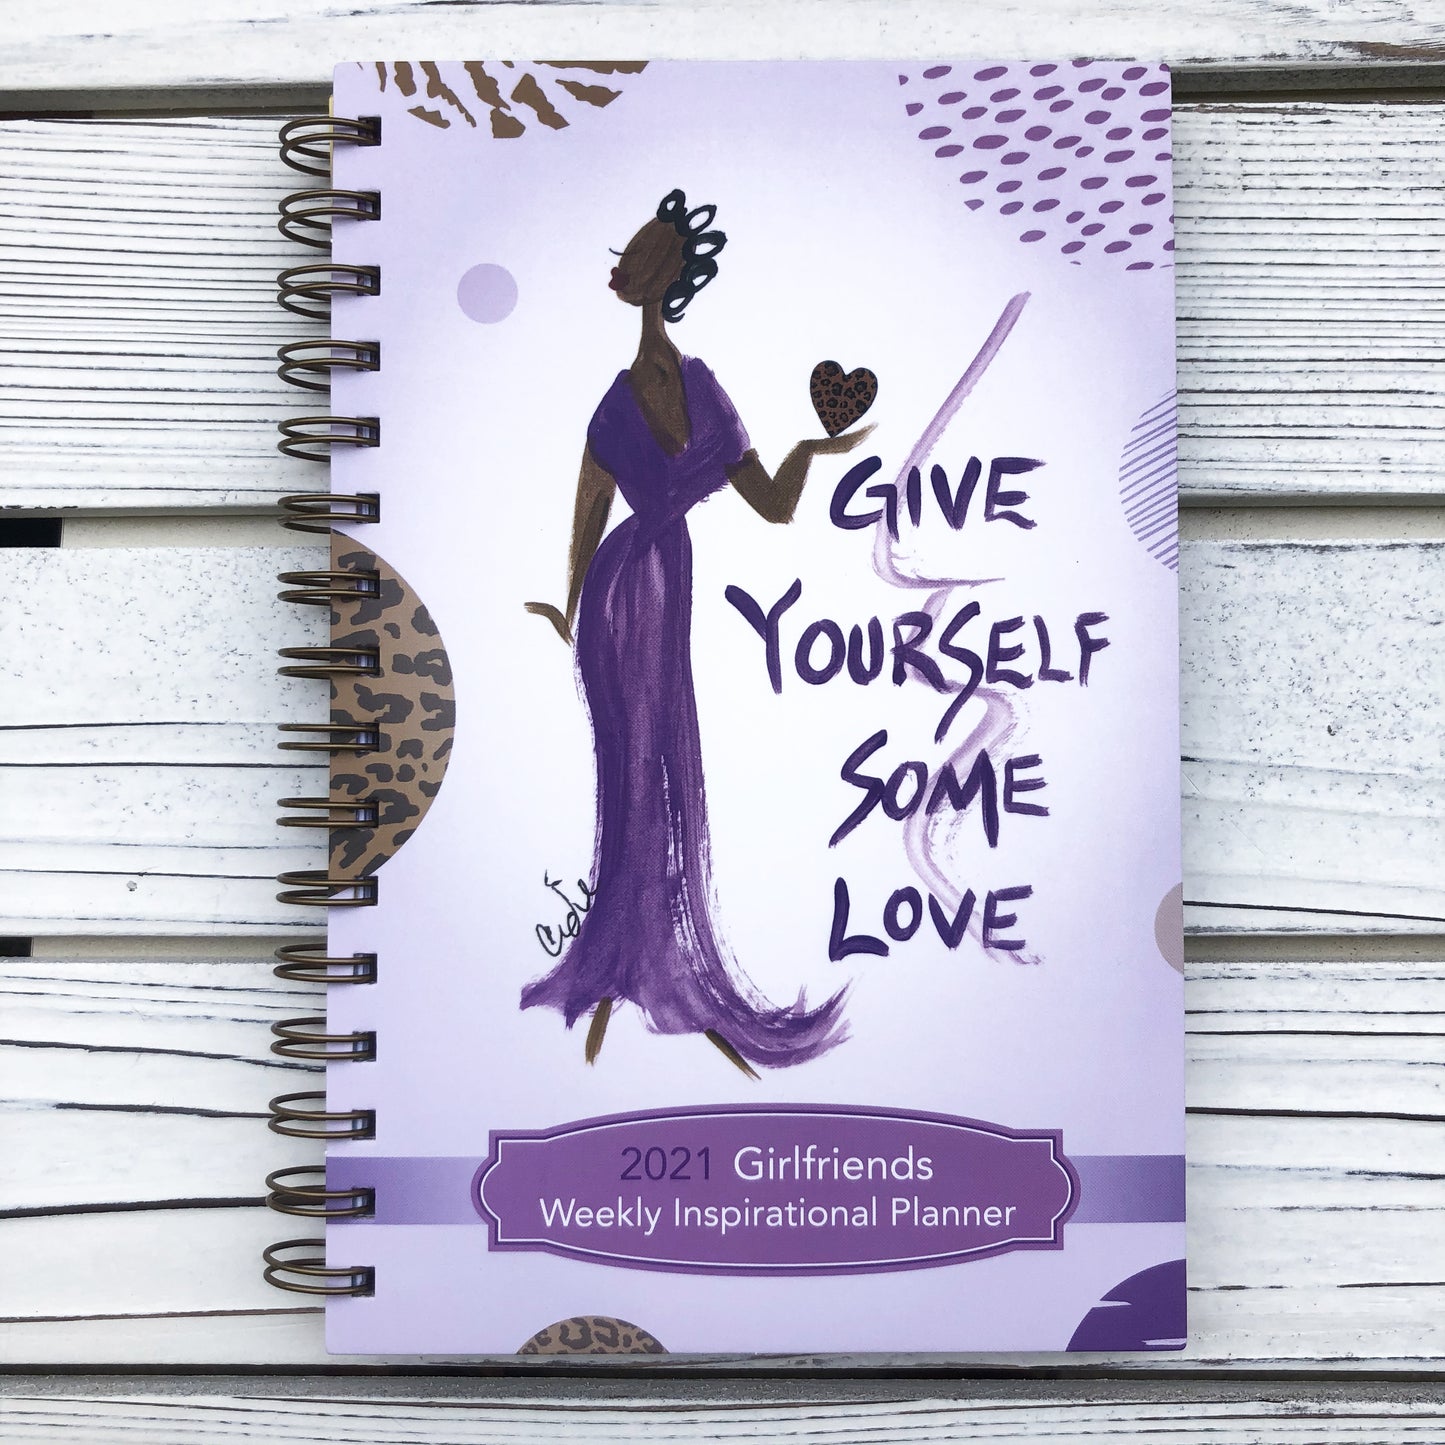 2021 "GIRLFRIENDS - GIVE YOURSELF SOME LOVE" 2021 Weekly Inspirational Planner